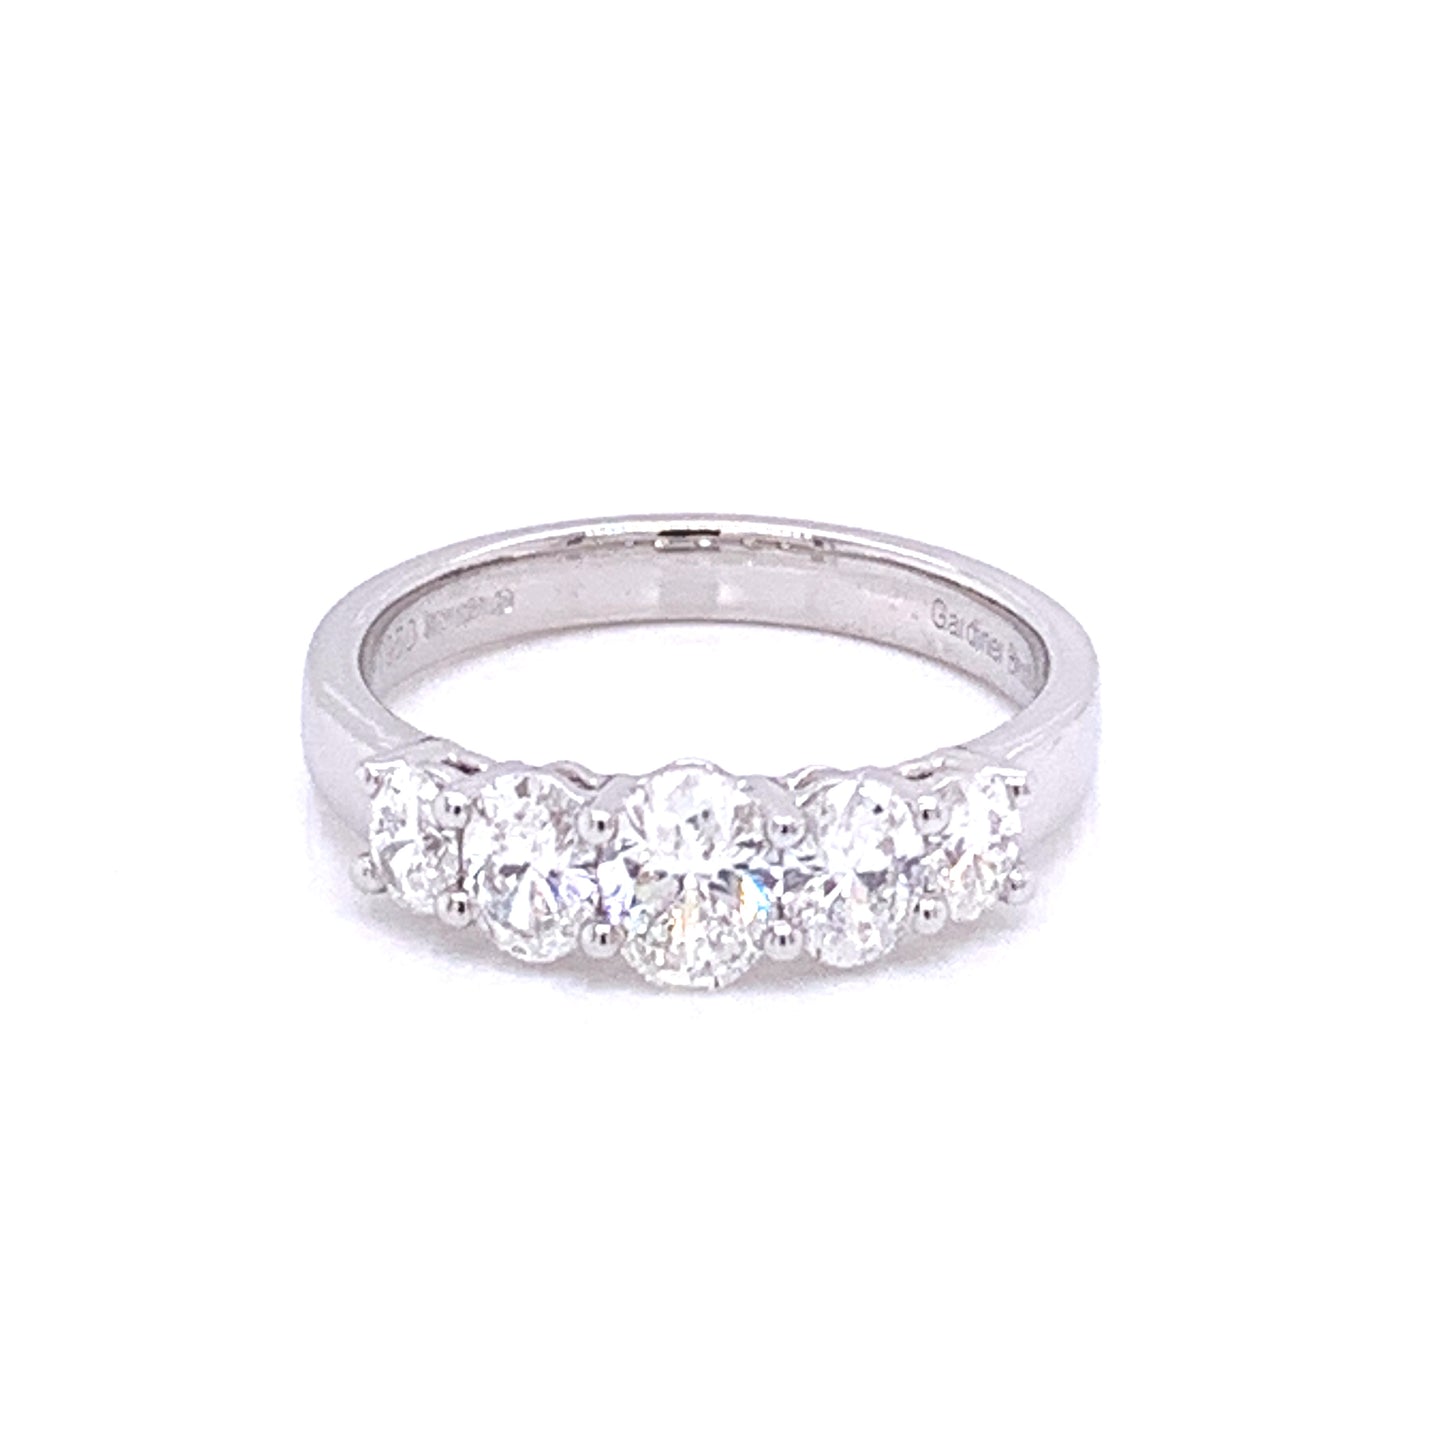 Aurora 5 Oval Shaped Diamond Ring - 1.06cts  Gardiner Brothers   